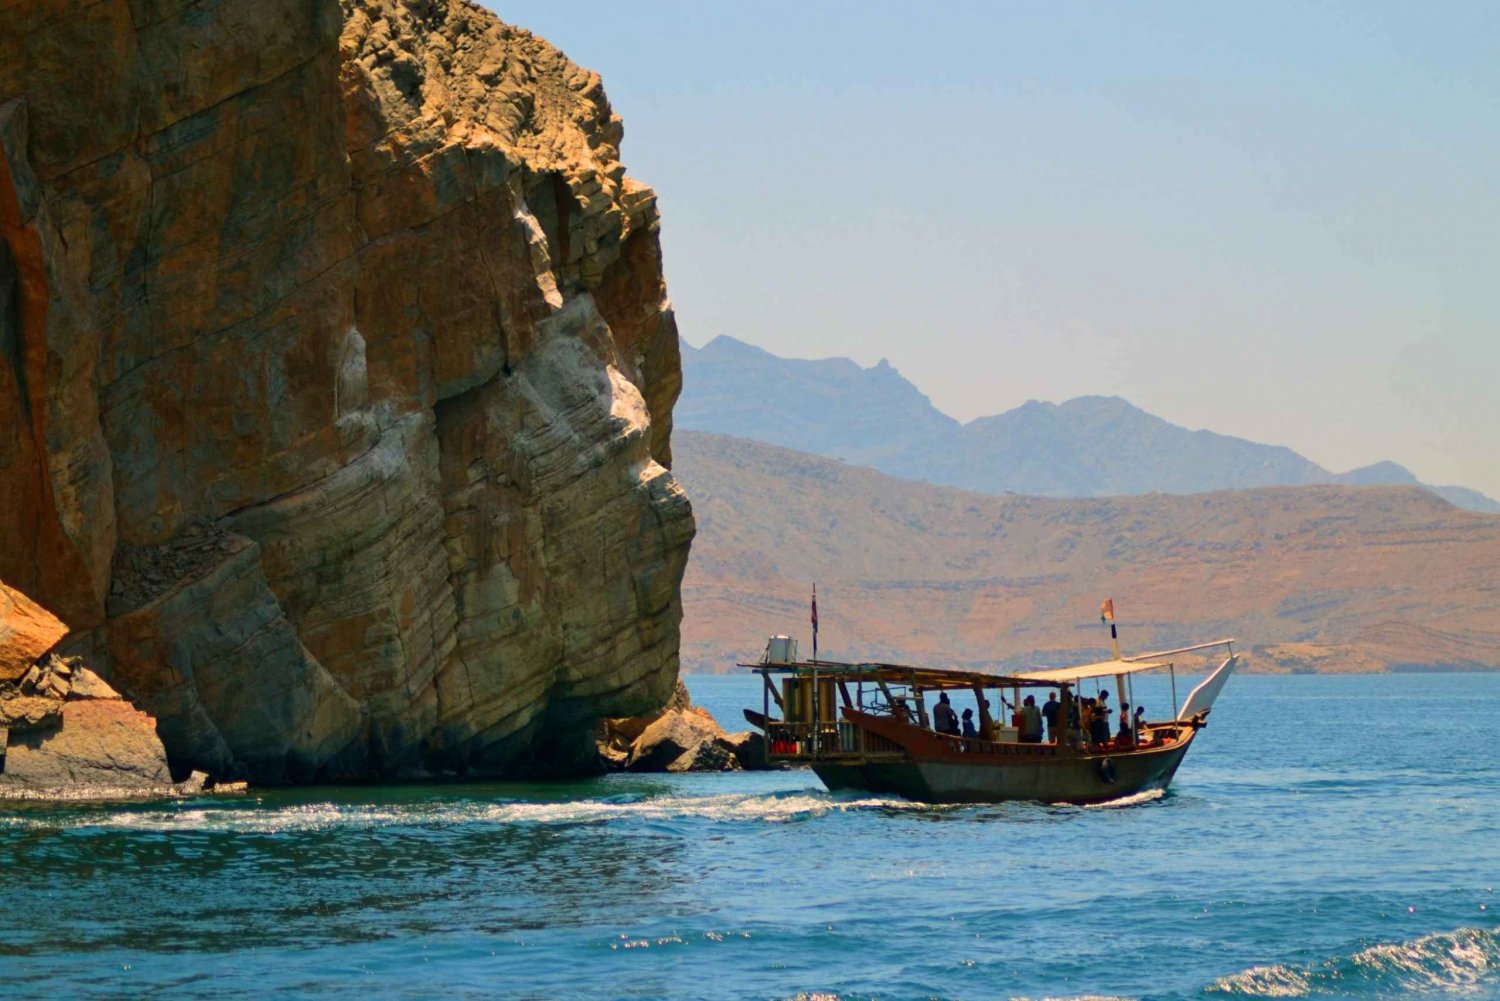 Khasab: Dolphin Watching Day Tour with Snorkeling & Lunch